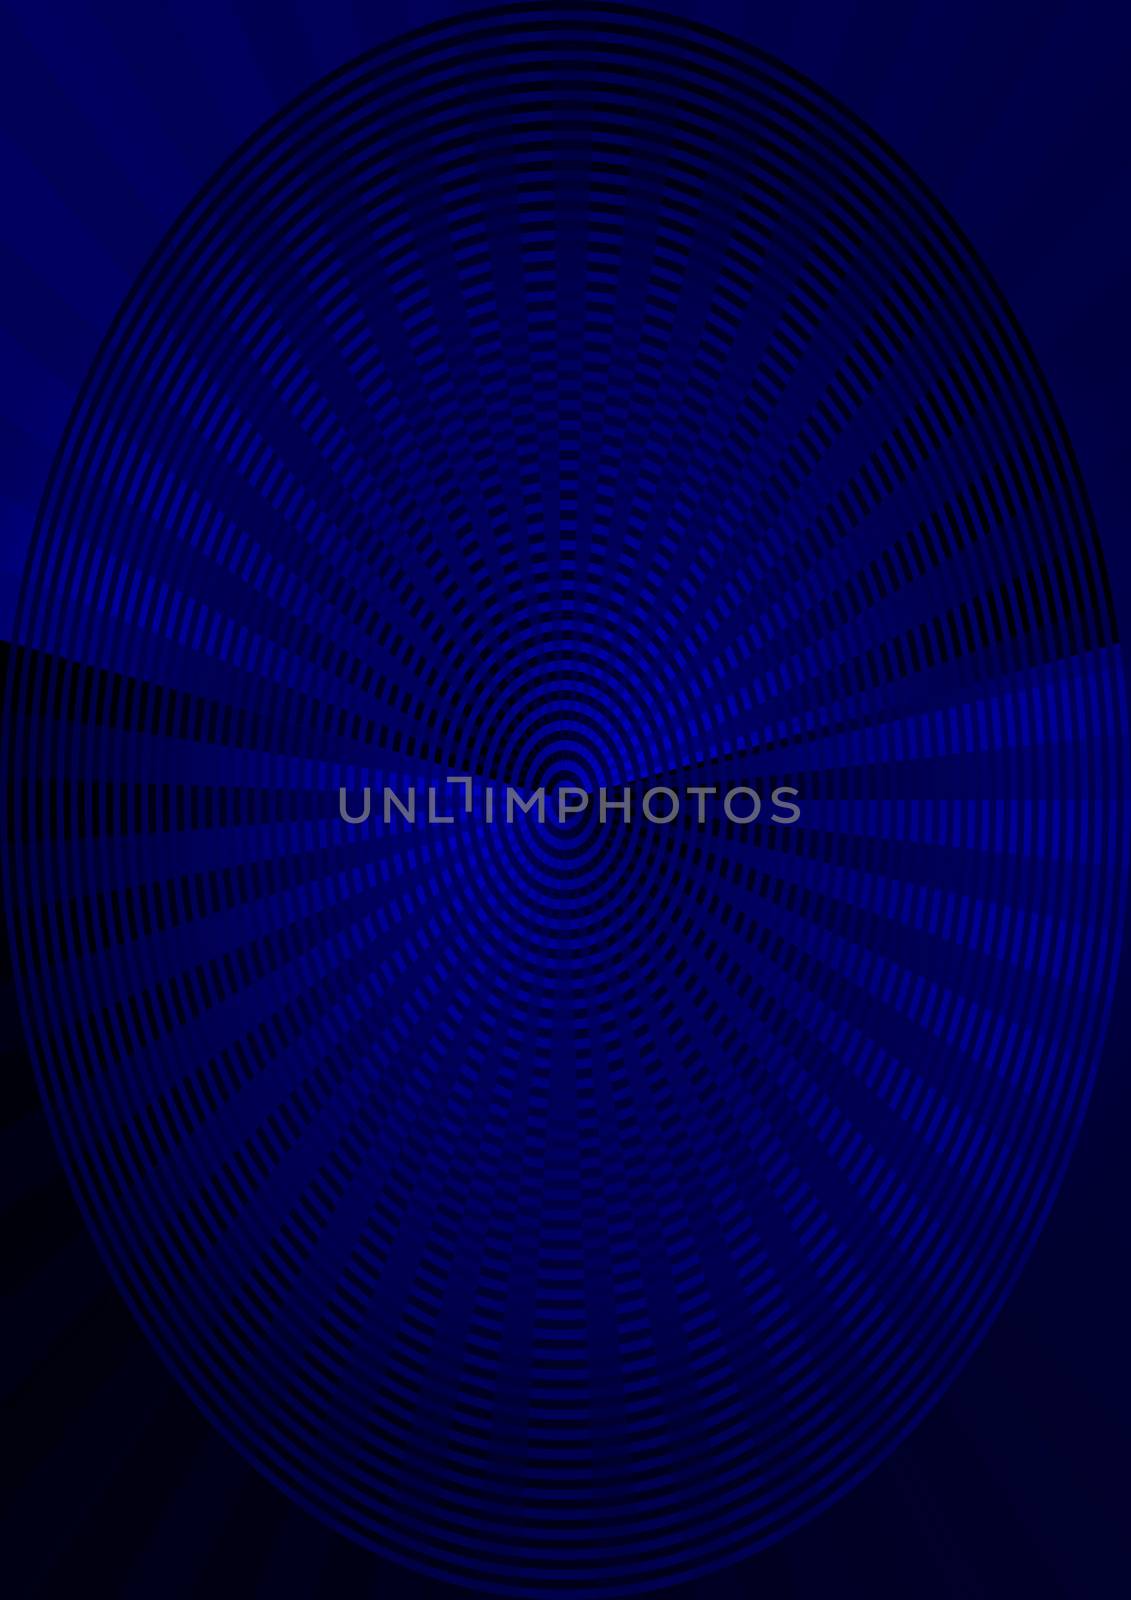 Abstract background different color rays over black. 3D illustration.